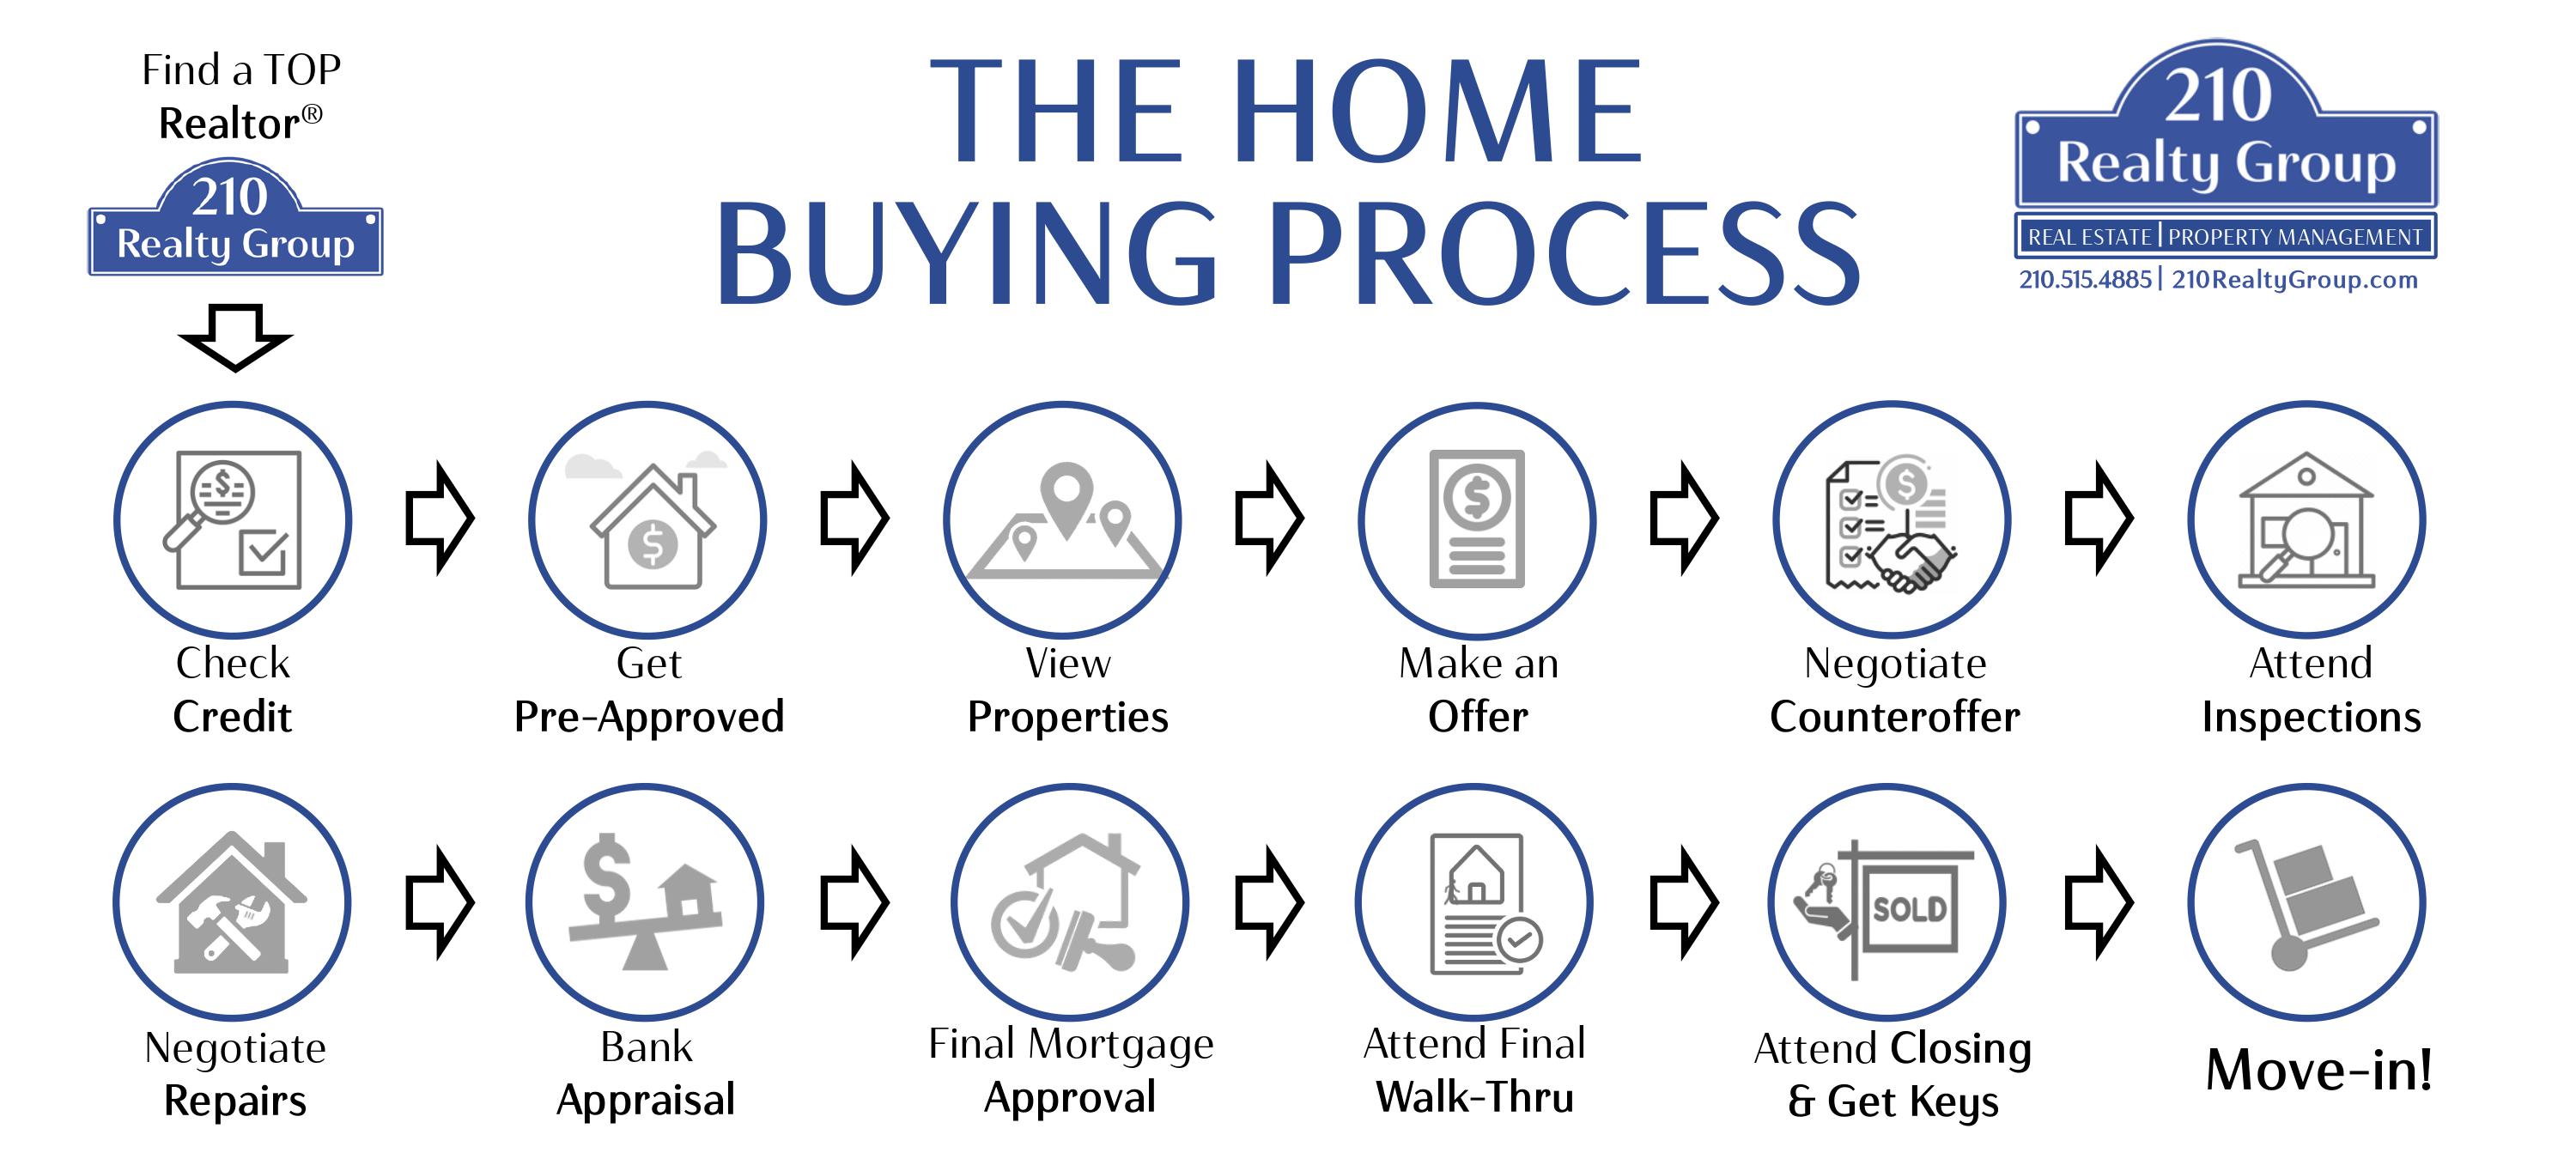 210 Realty Group - Buying Process Image